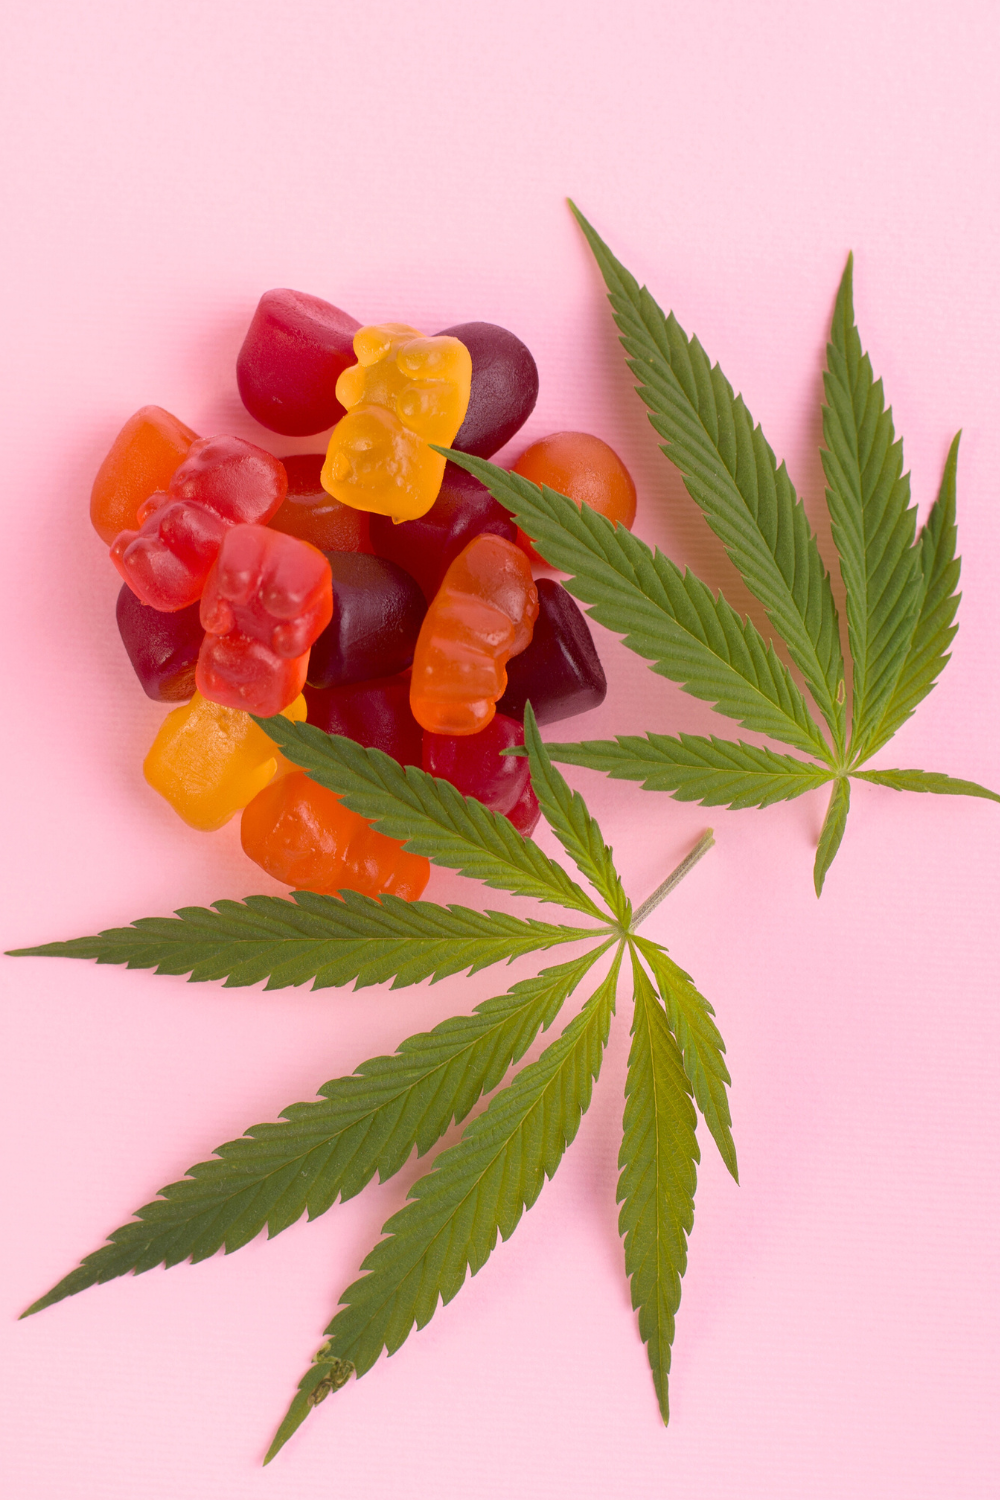 A picture of a cannabis leaf and gummy bears.